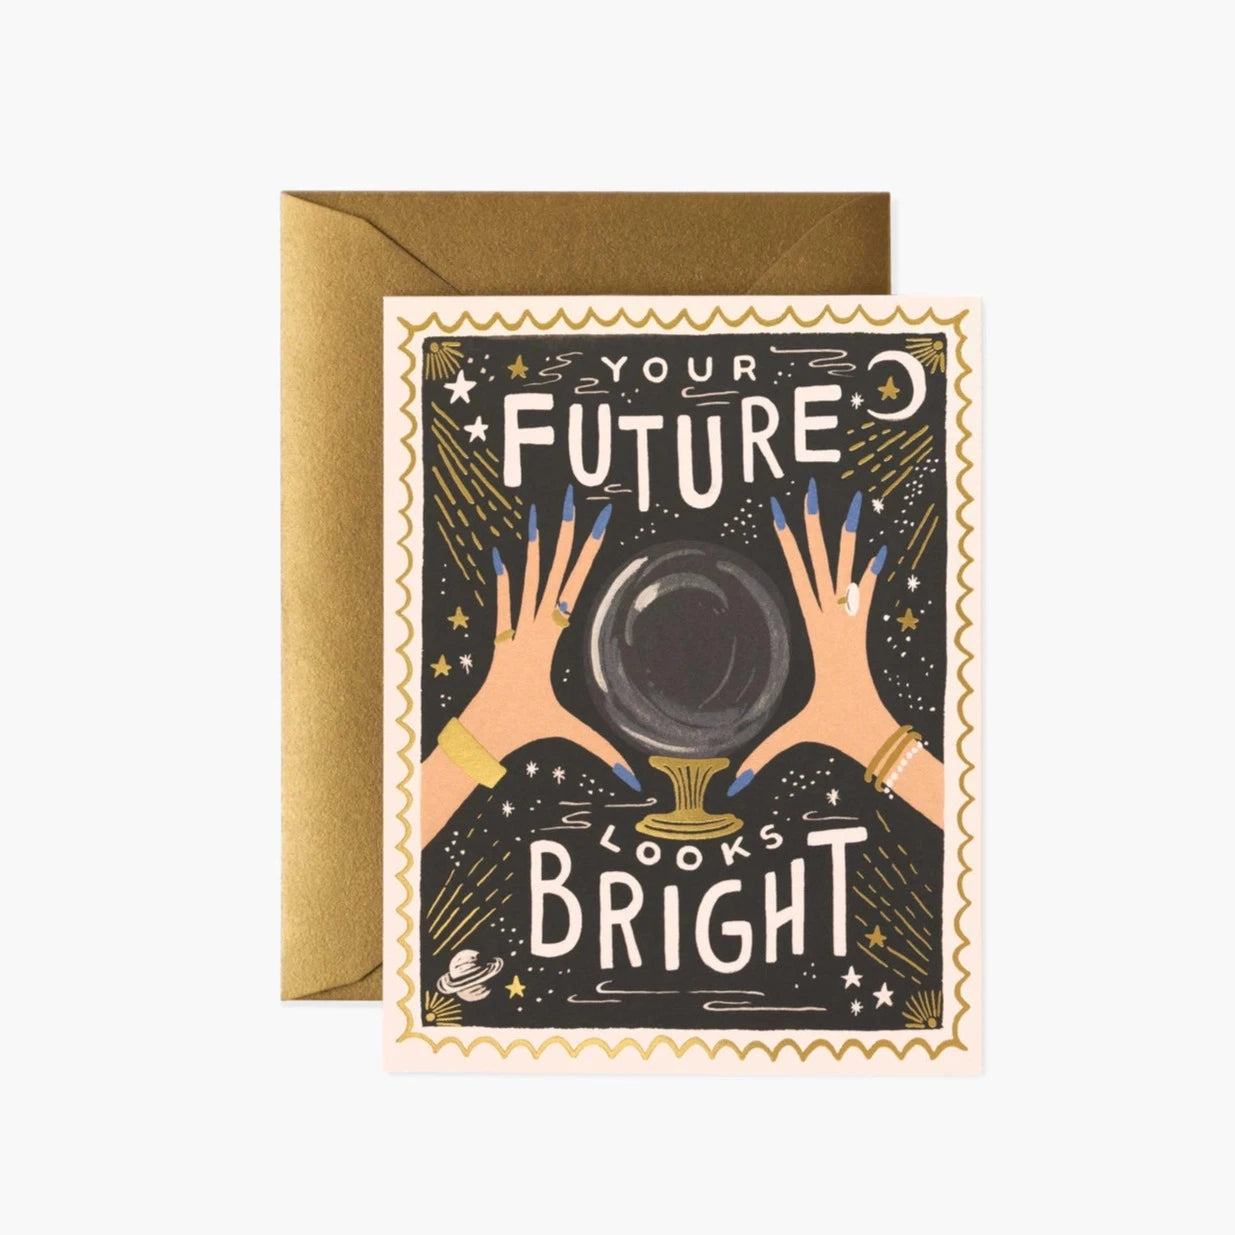 Your Future Looks Card Bright R. Paper &amp; Co.